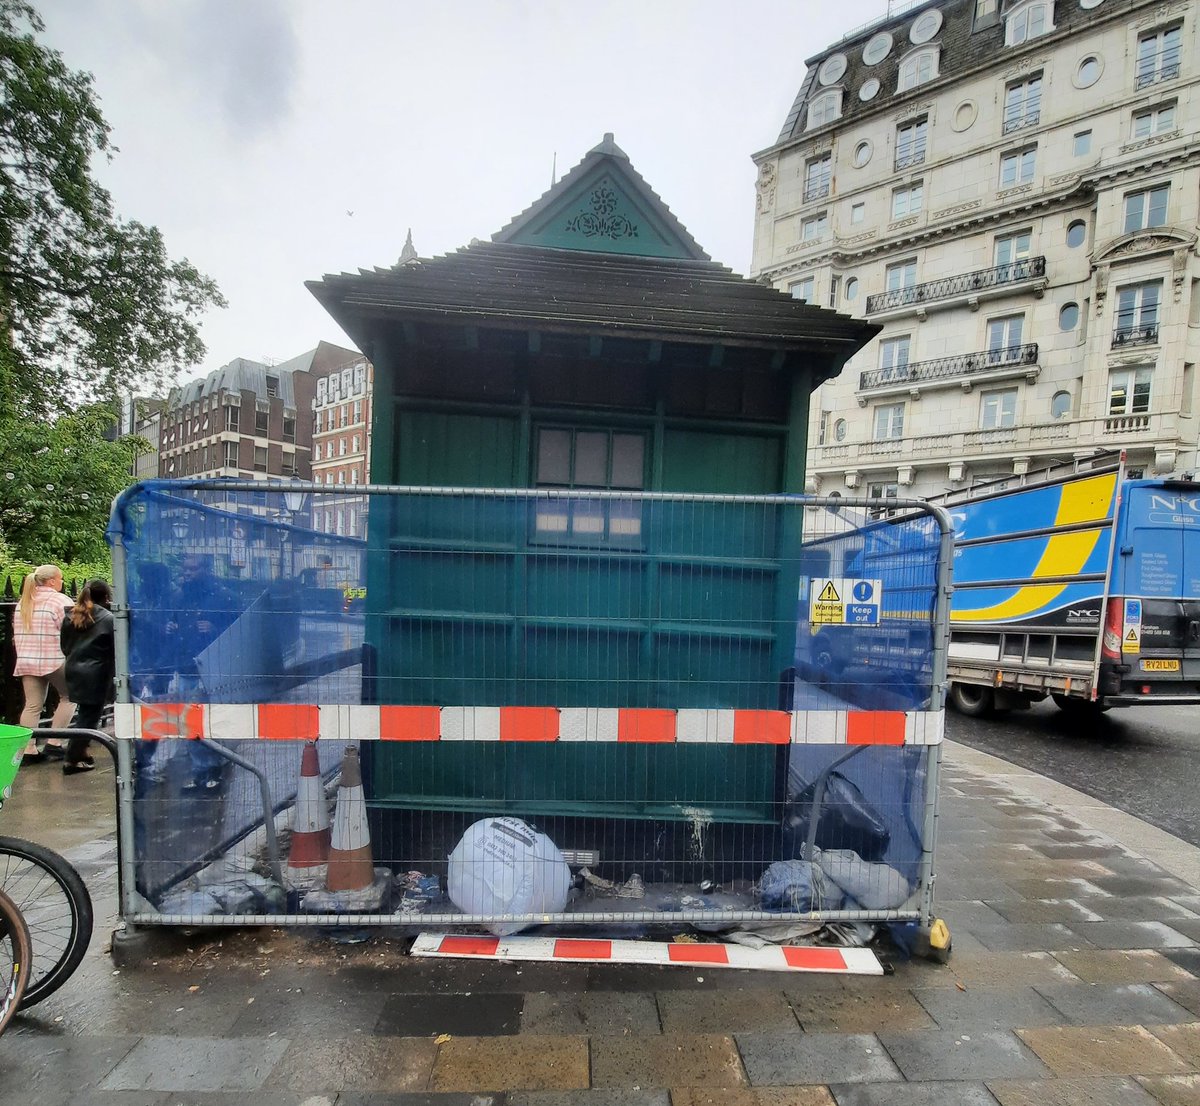 Still no change or sign of movement at Hanover Square with the green hut Taxi Shelter. @ShelterFund